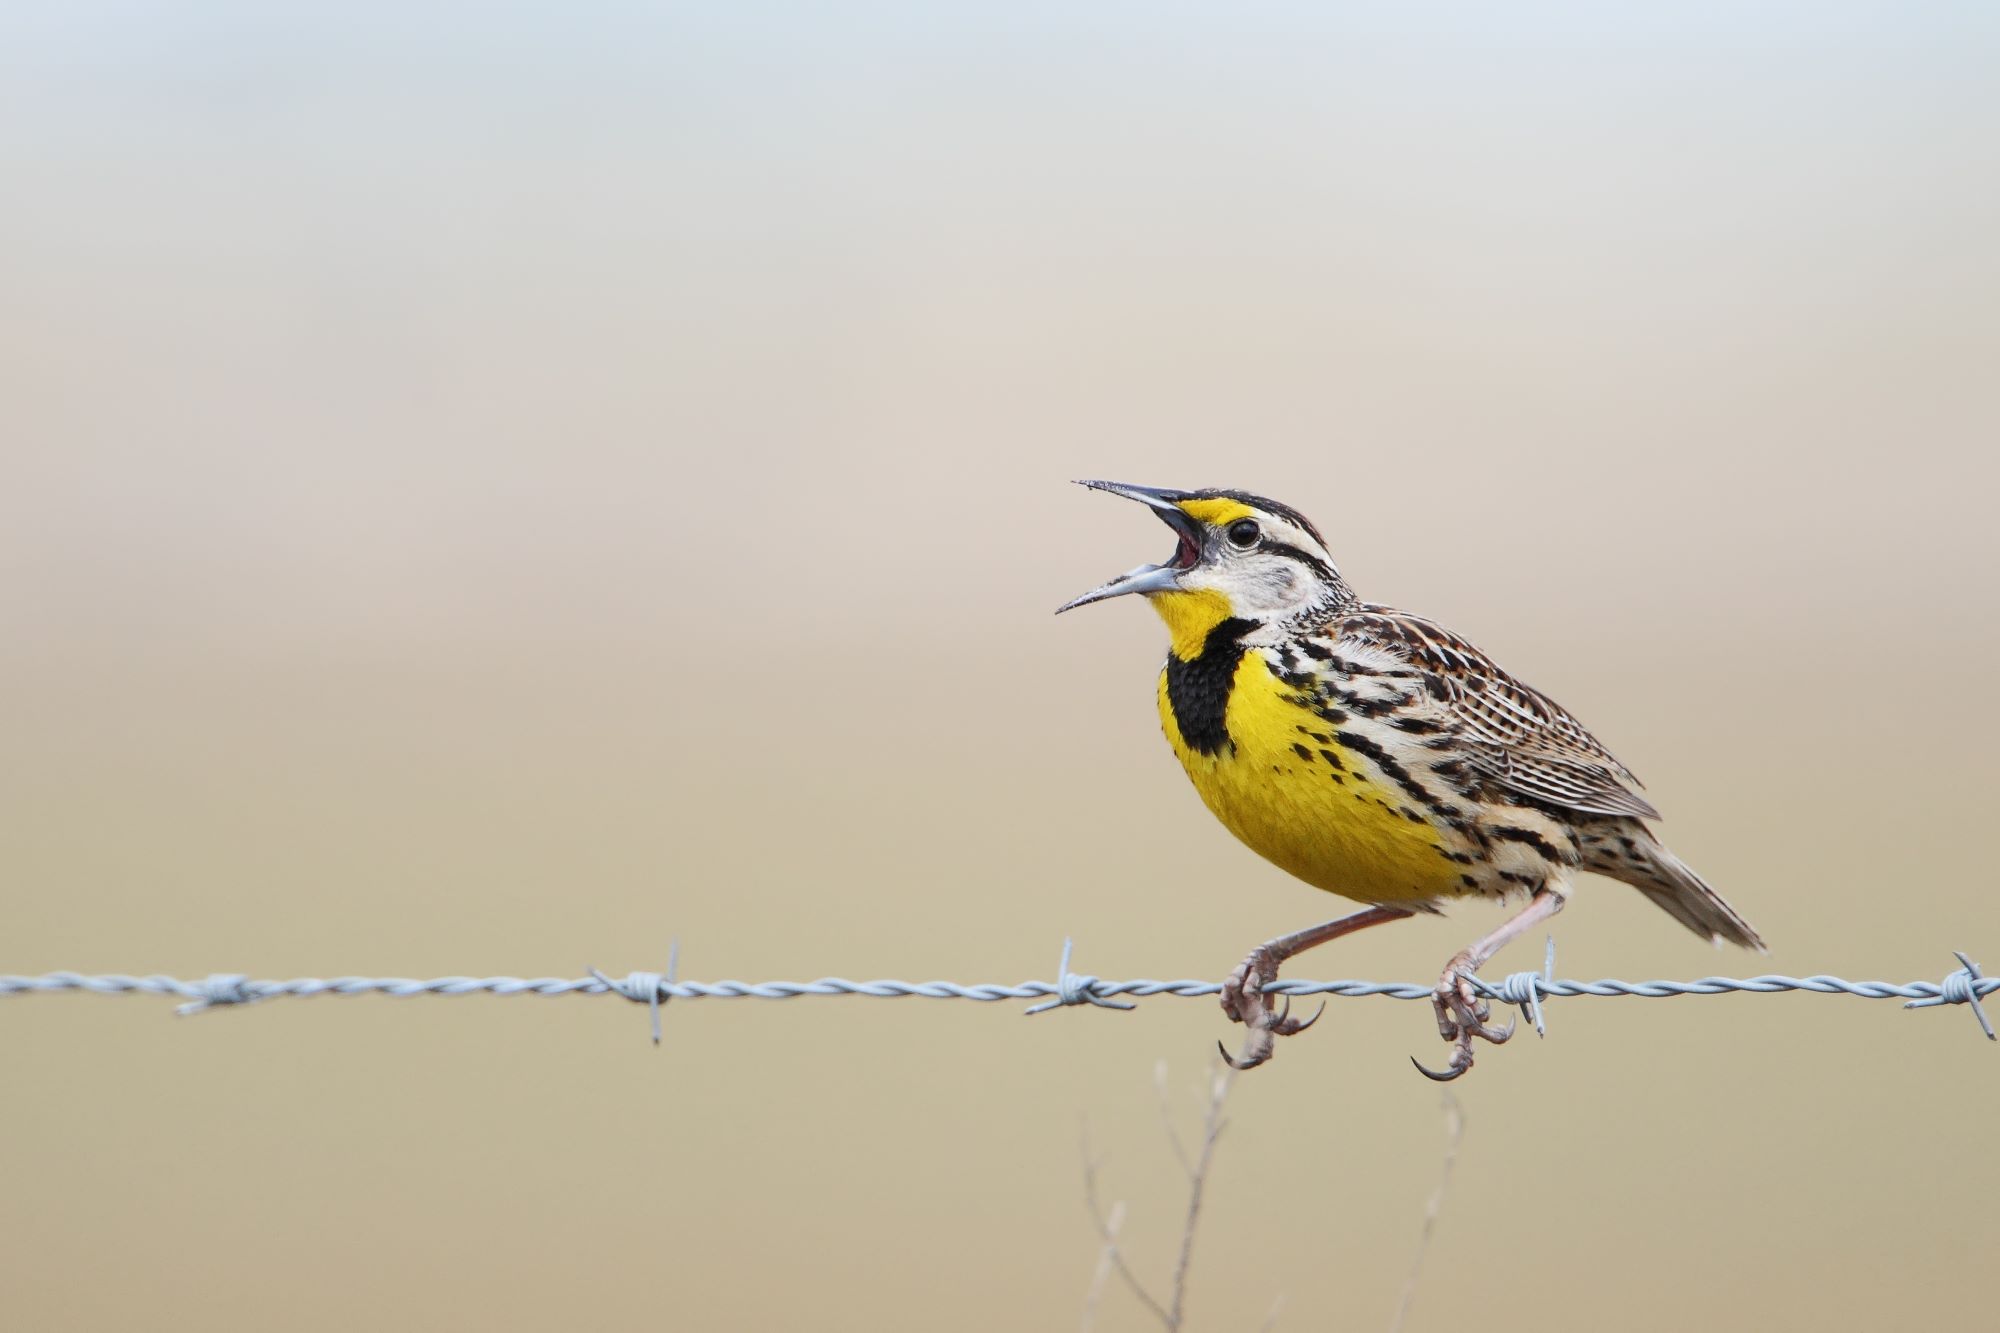 yellow chested bird sings while perched on barbed wire